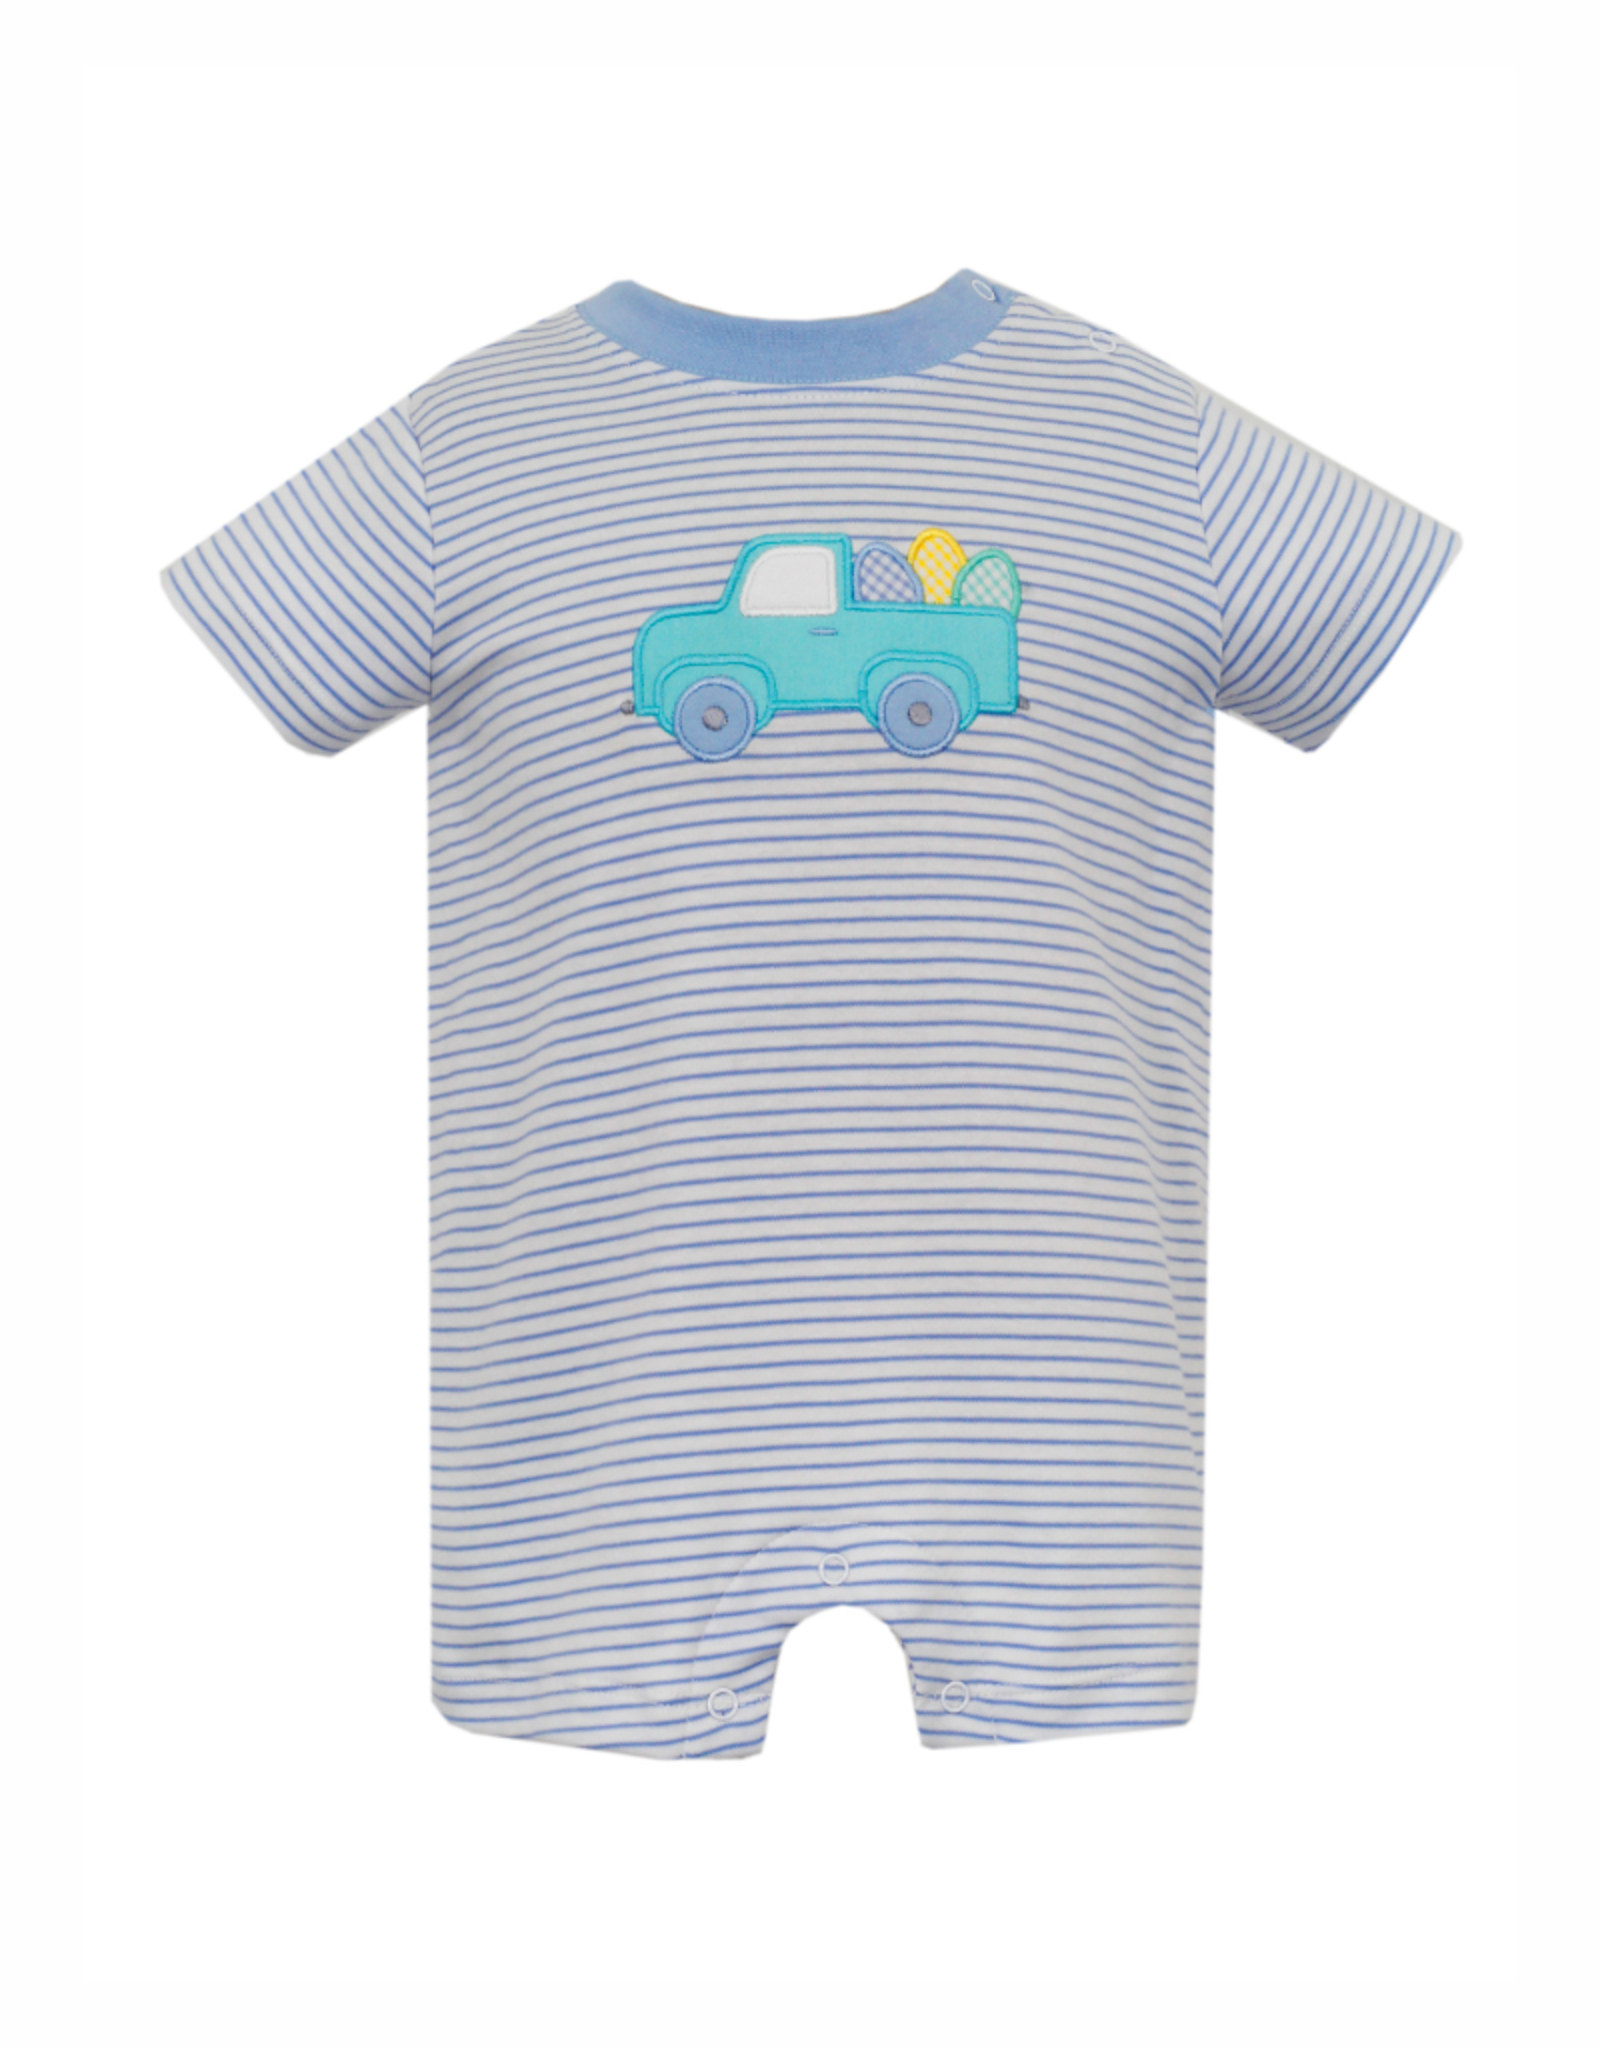 Claire and Charlie Lt Blue Stripe Knit Romper with Easter Egg Truck